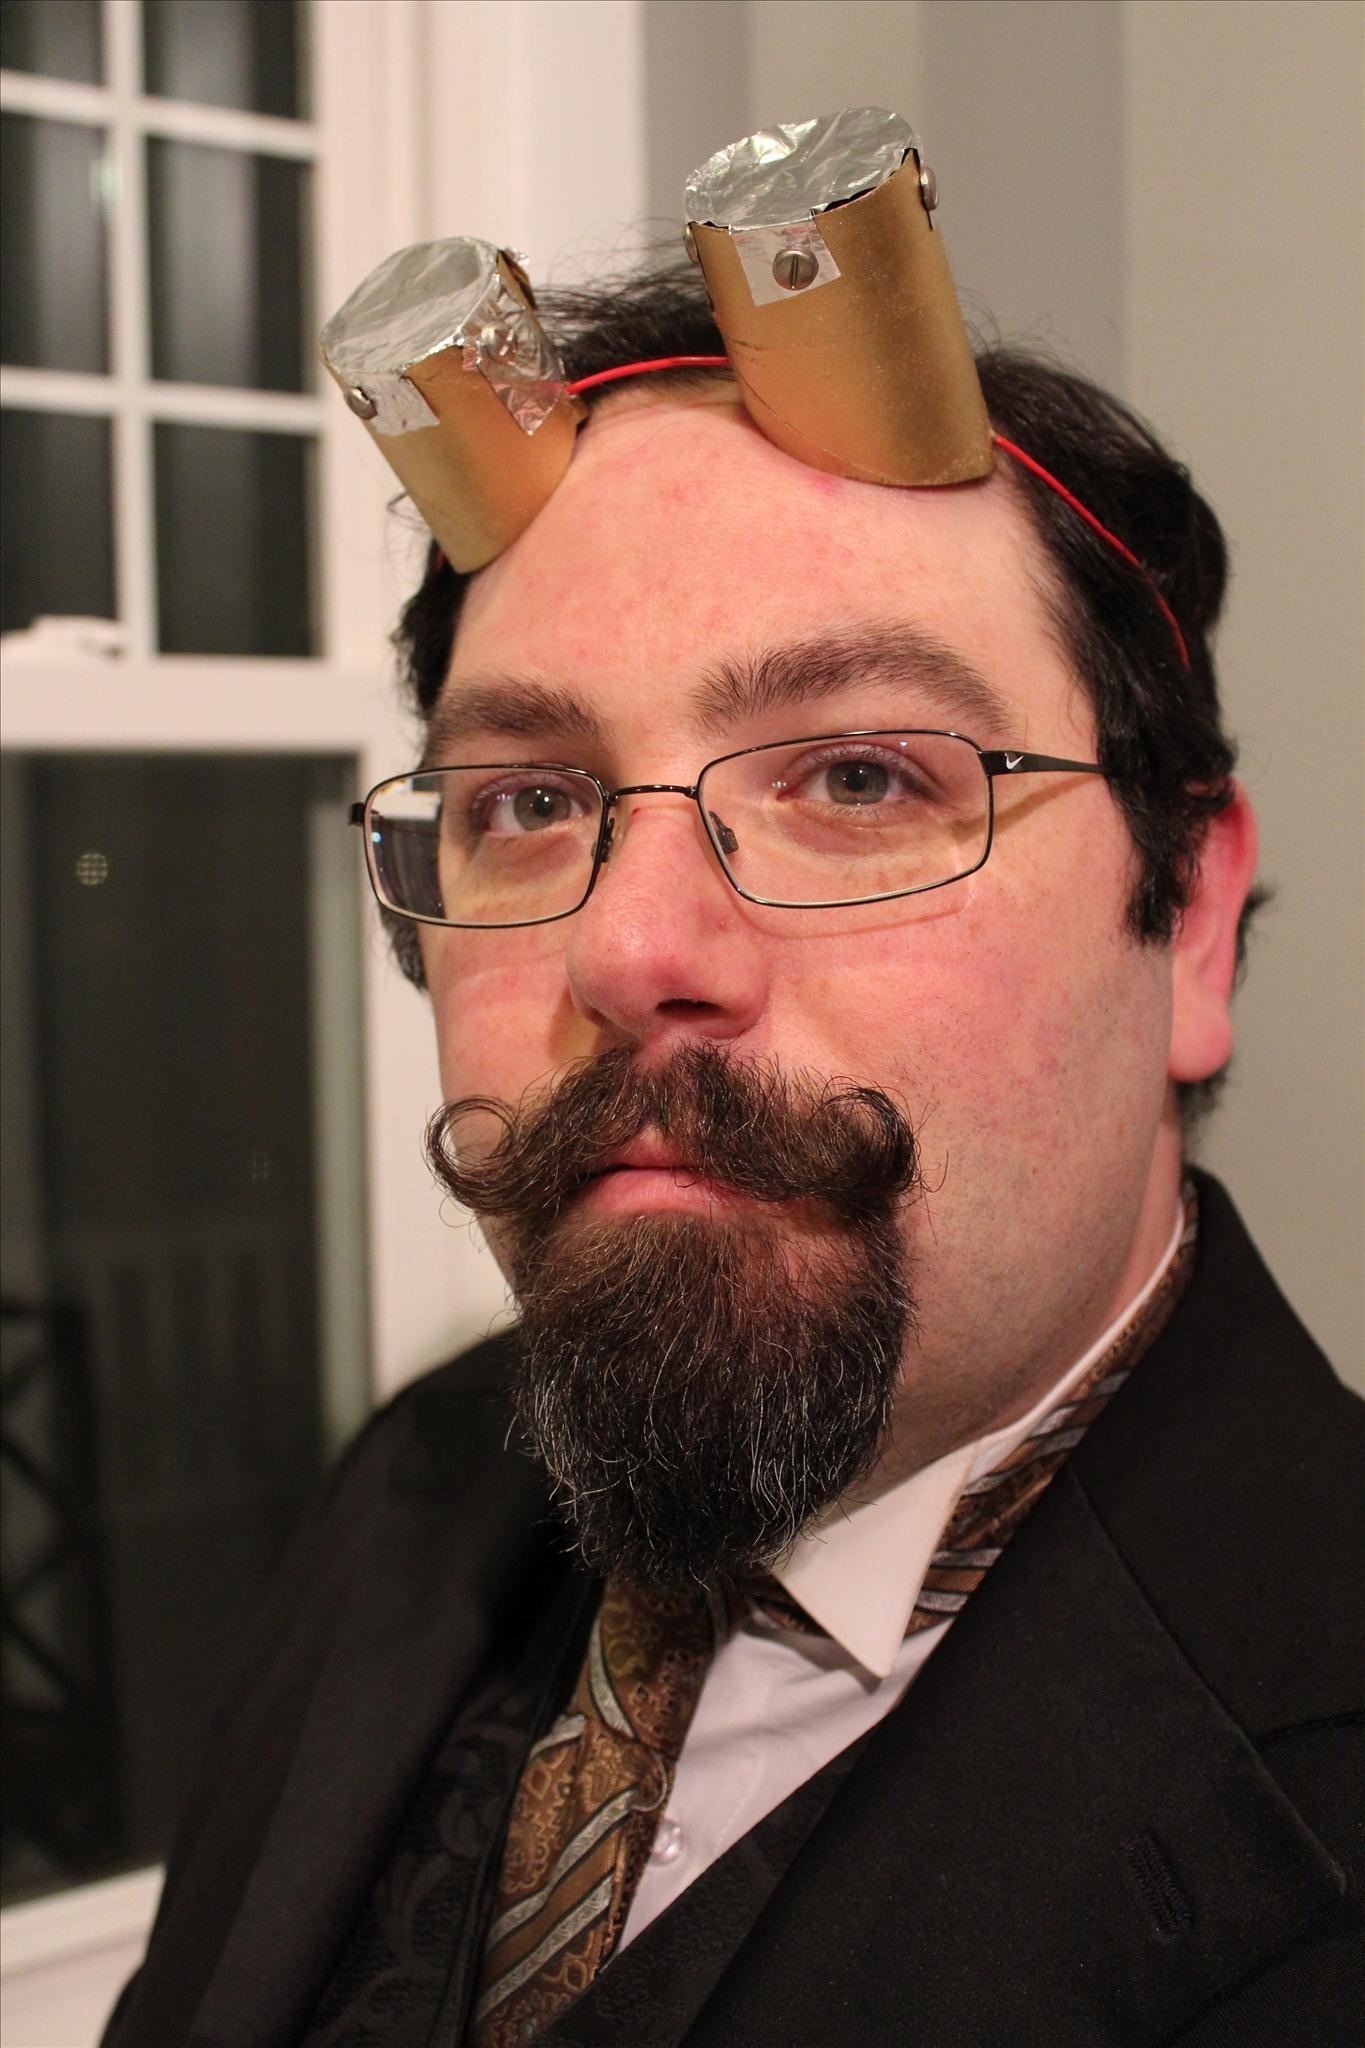 Steampunk Yourself for Halloween in 10 Minutes or Less